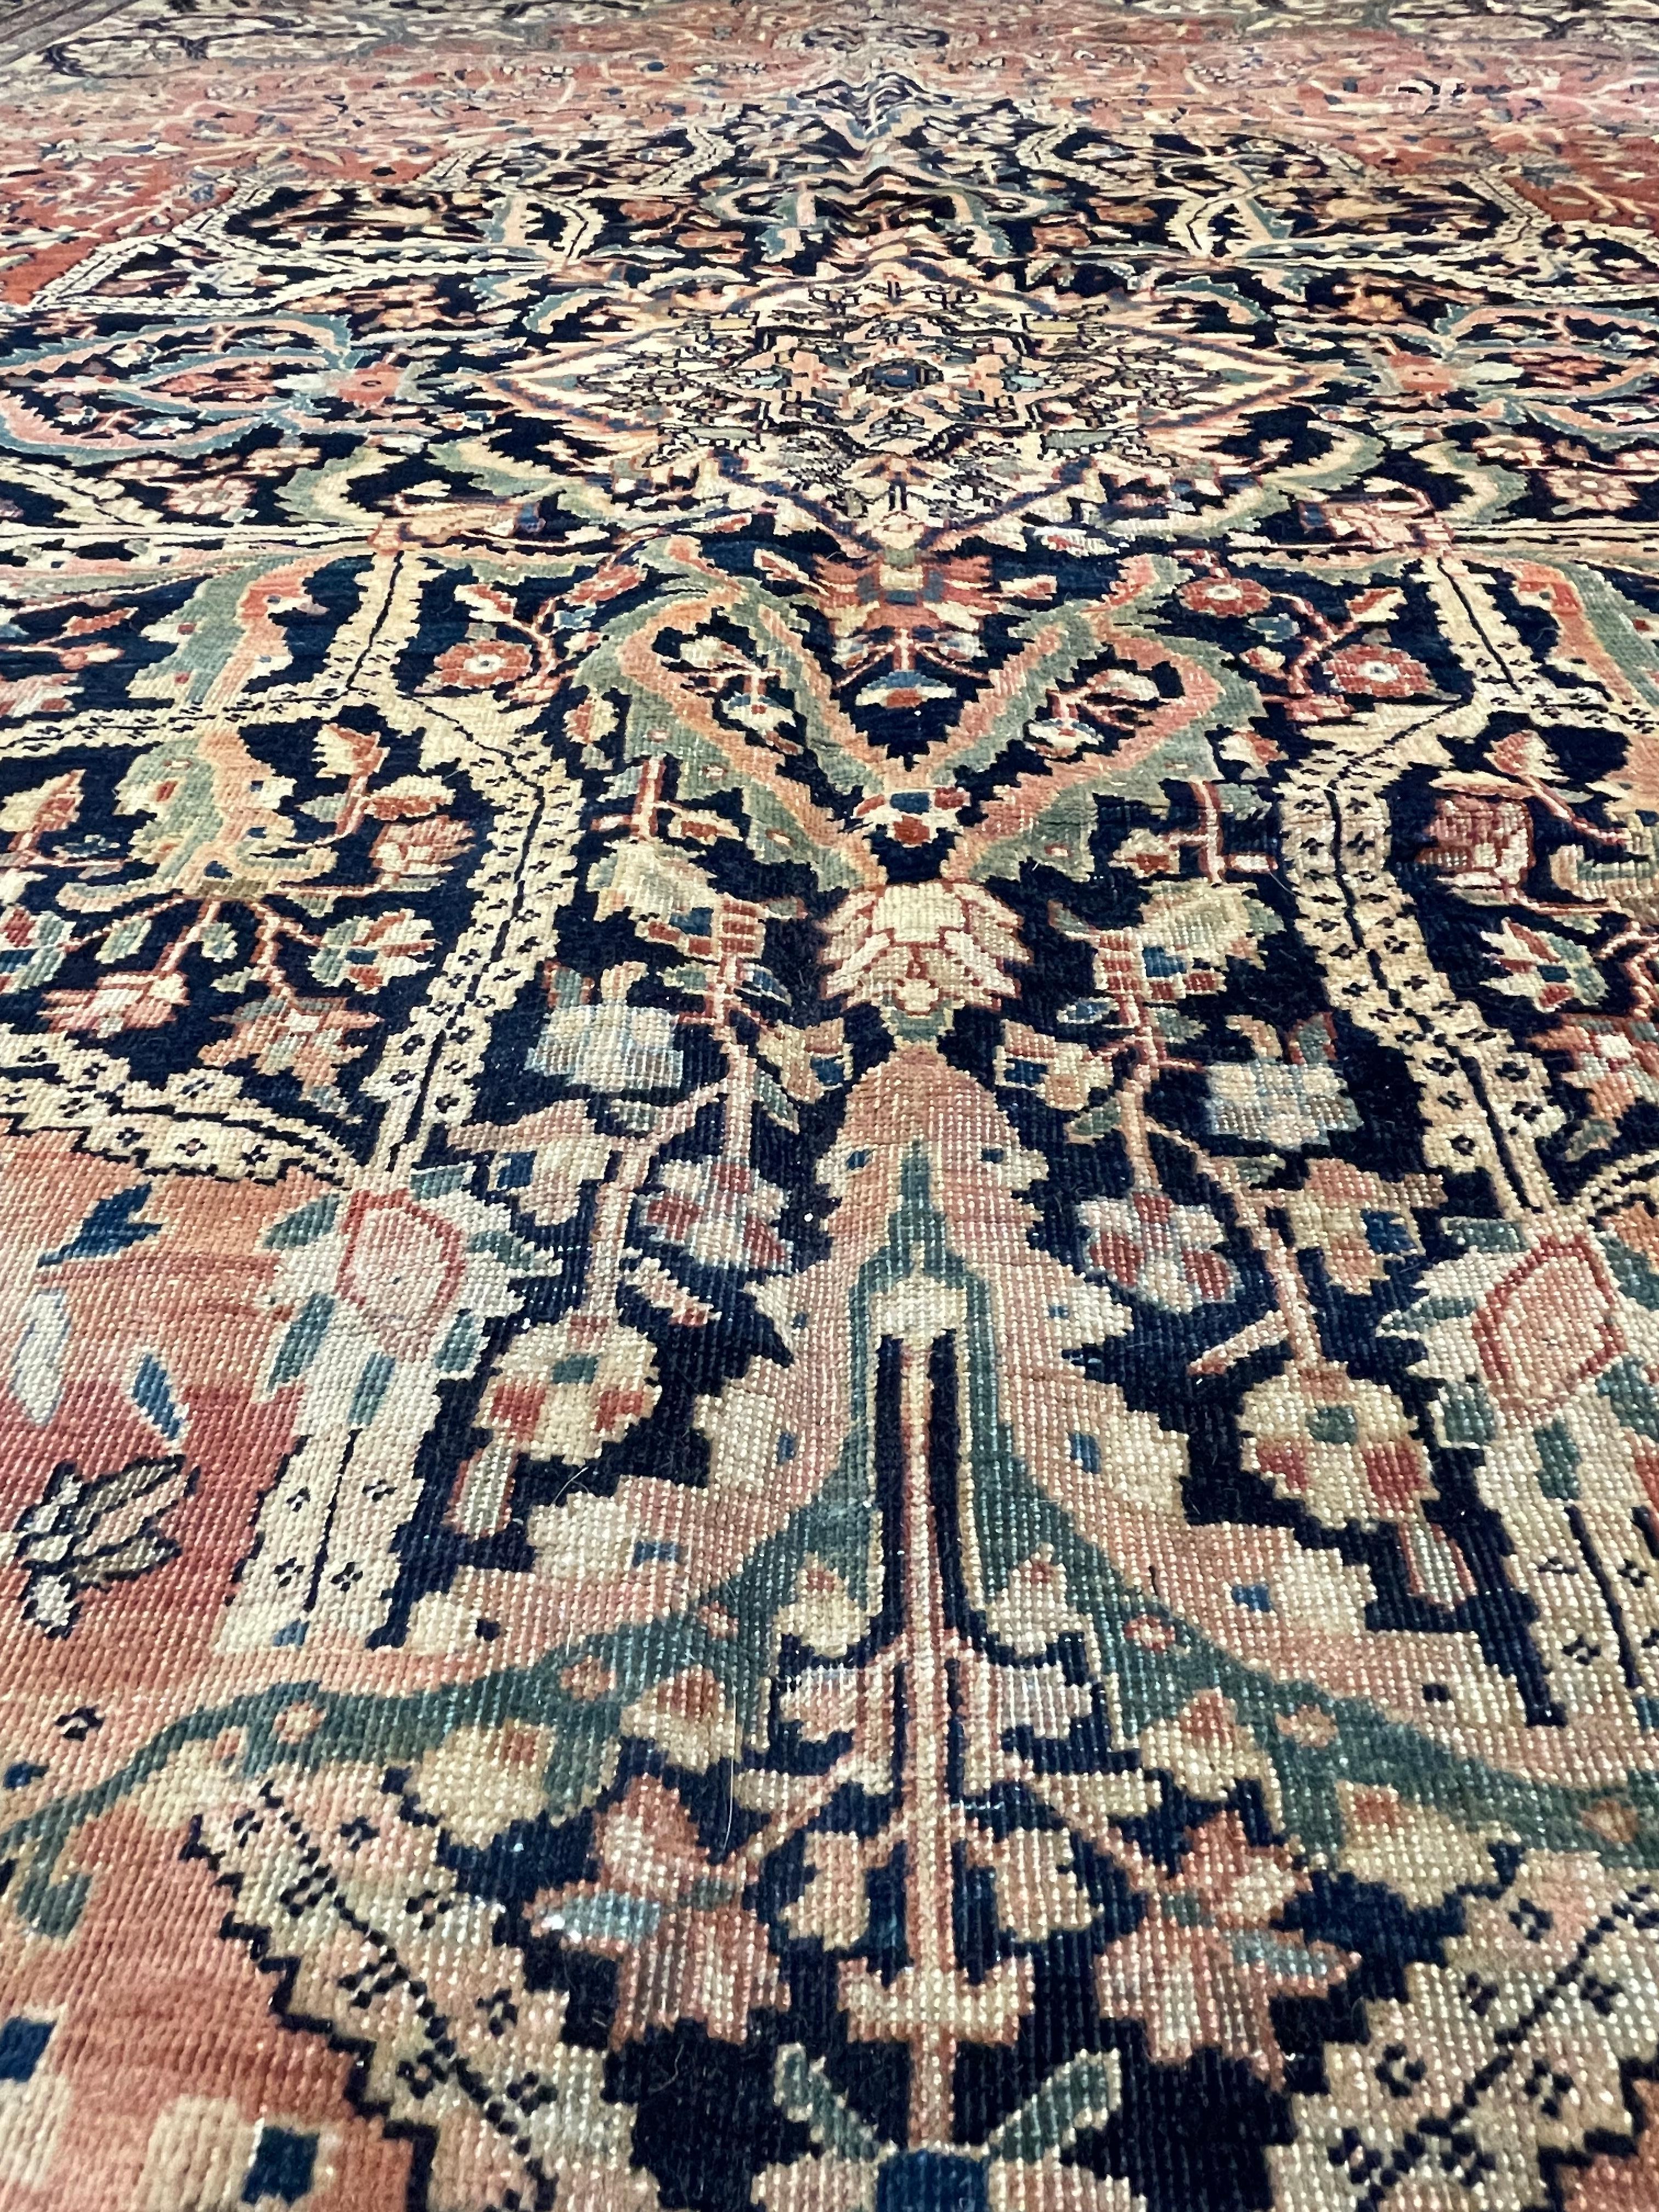 This rug is hand woven in the town of Farahan located in west Persia.Farahan carpets are very finely woven with hard wool and they are clipped very flat. The restrained style of decoration is almost gothic in character. Farahan carpets came to